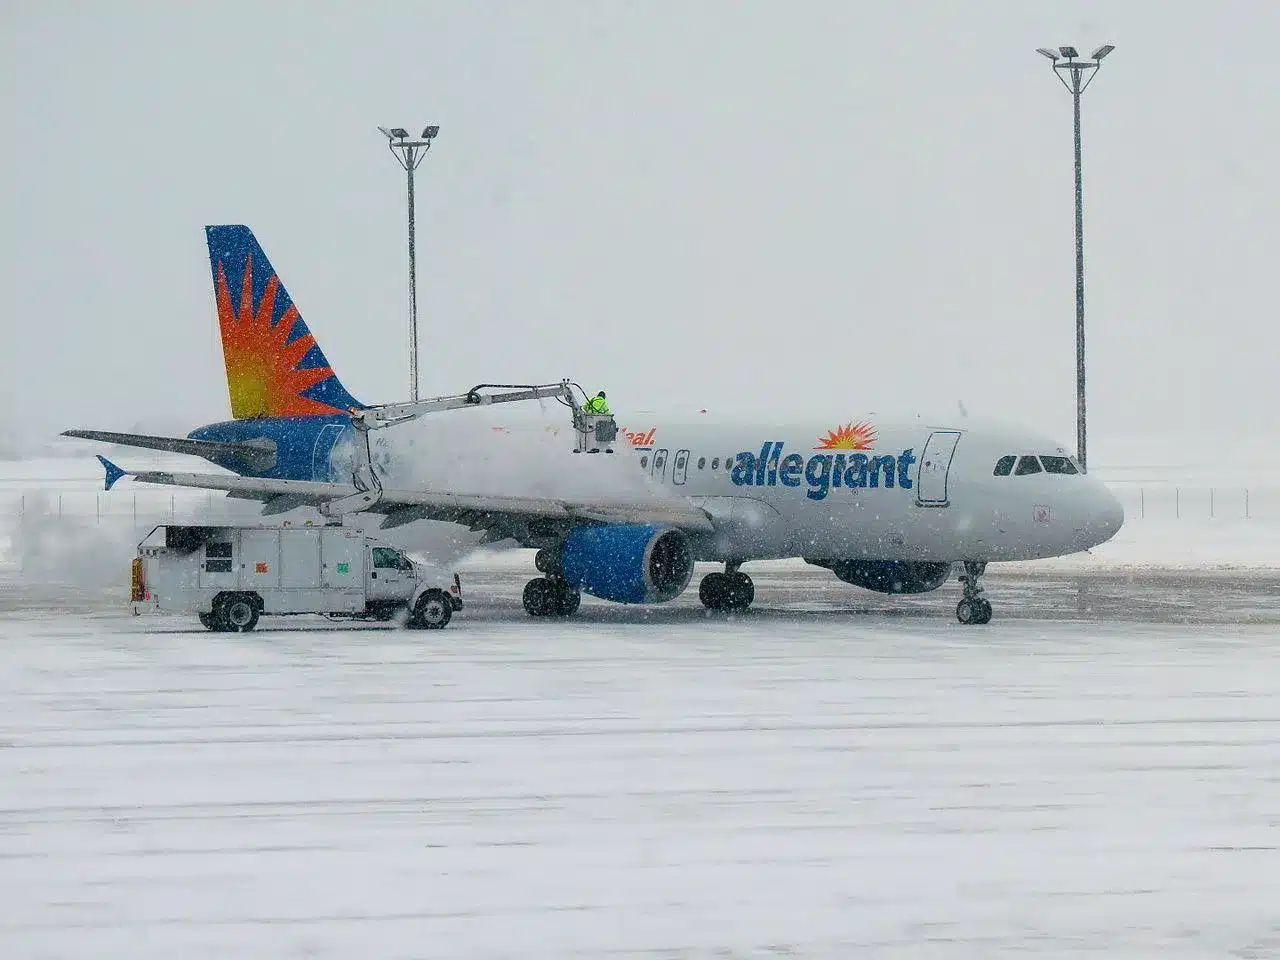 Allegiant Air has an operating base at Provo Municipal Airport.